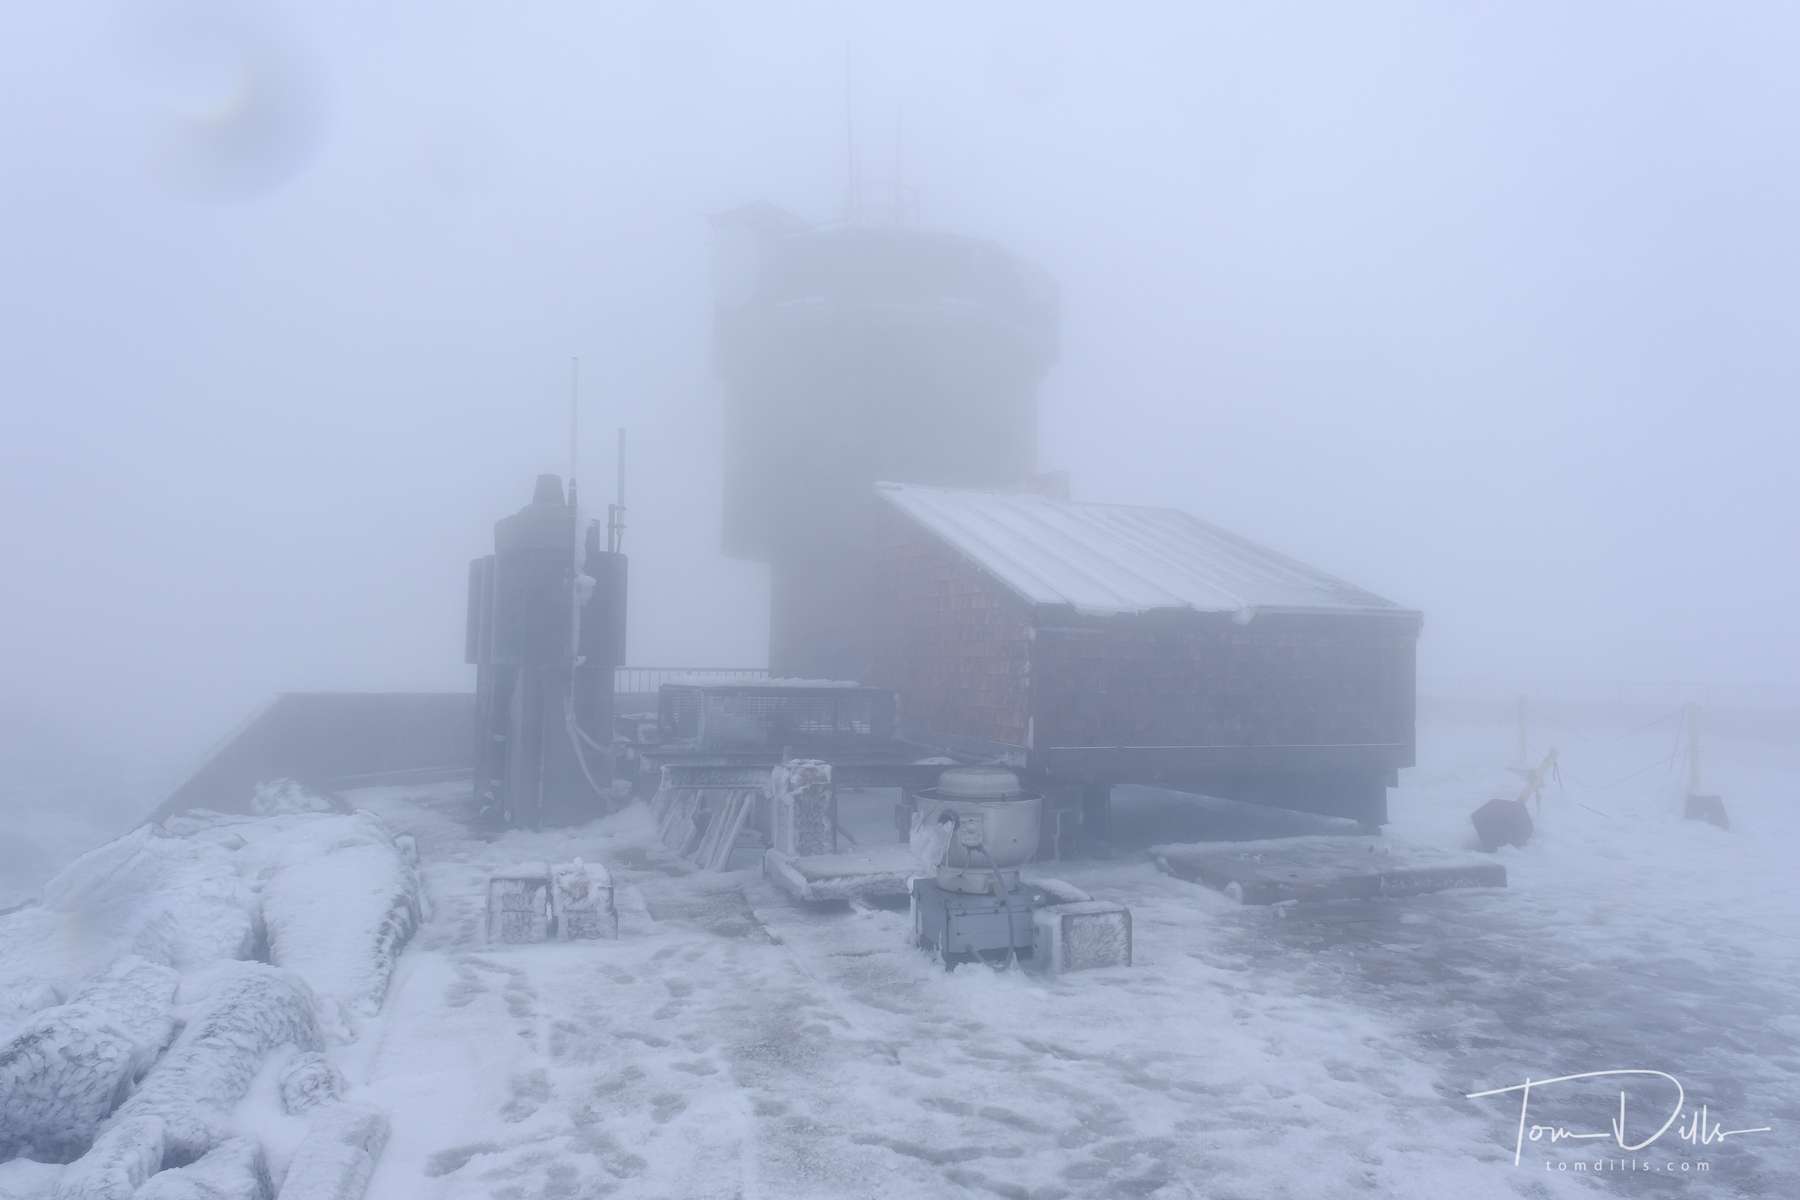 Freezing conditions at the top of Mount Washington, New Hampshire